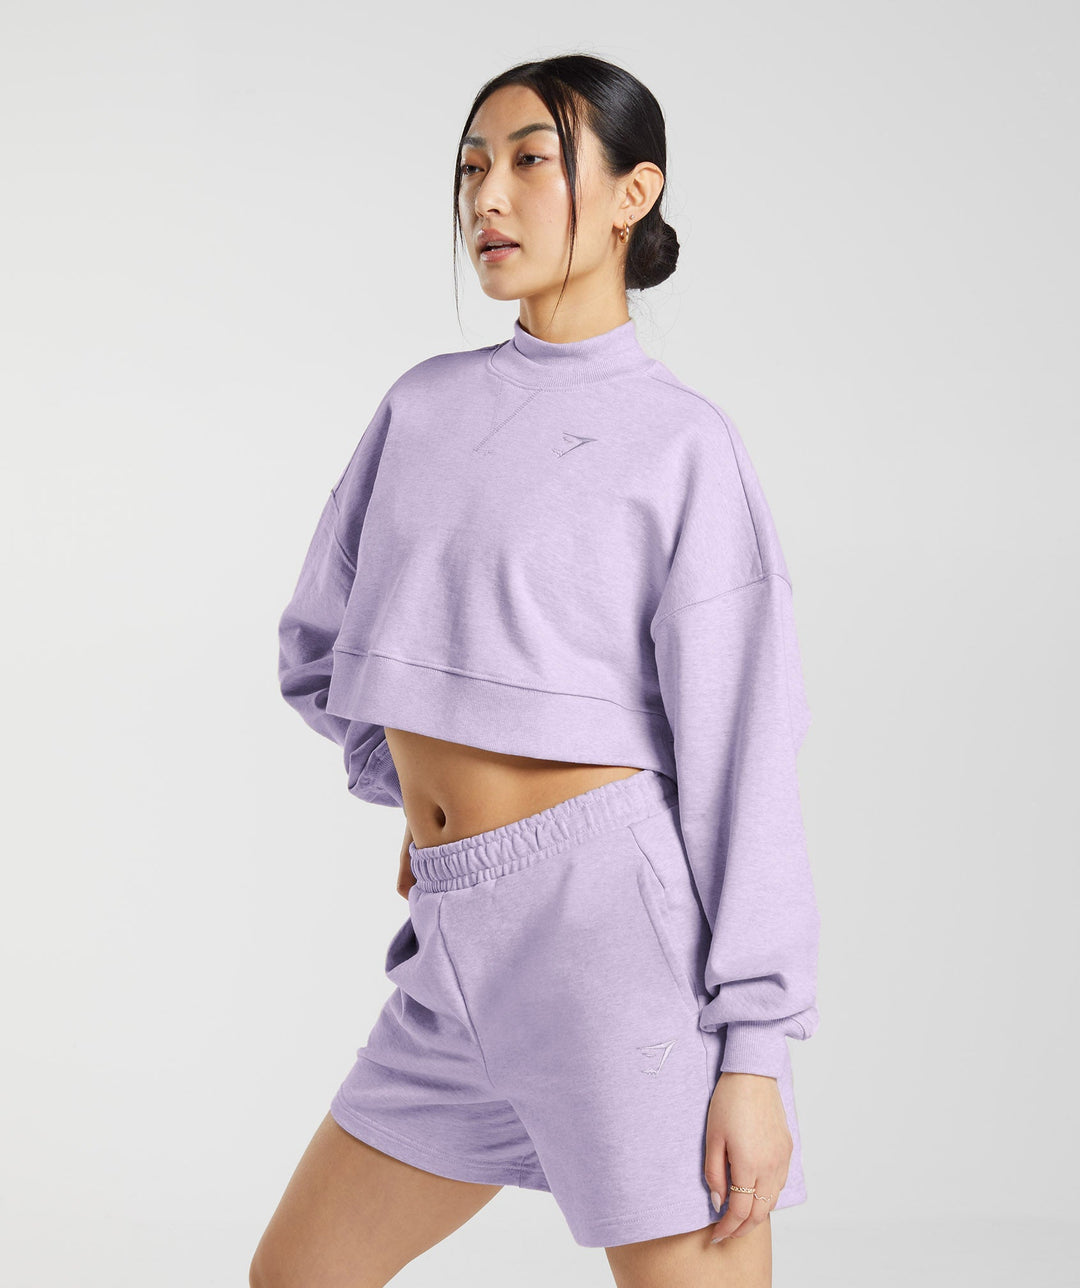 Gymshark Rest Day Sweats Cropped Pullover - Aura Lilac Marl | Gymshark